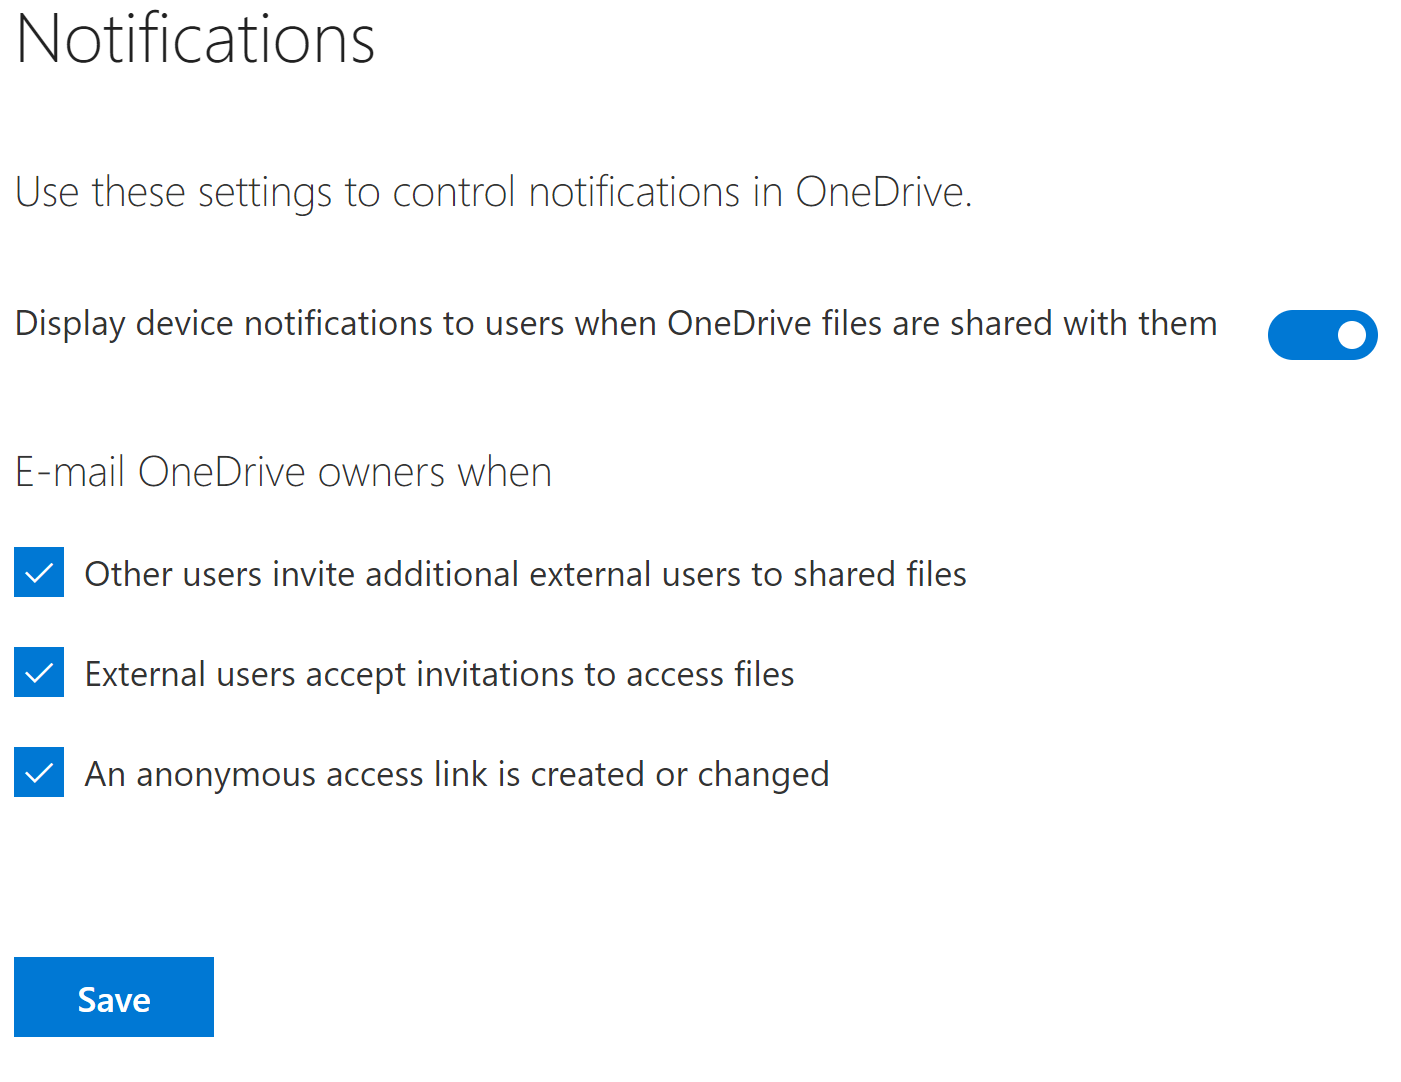 Configuring OneDrive for Business Notifications